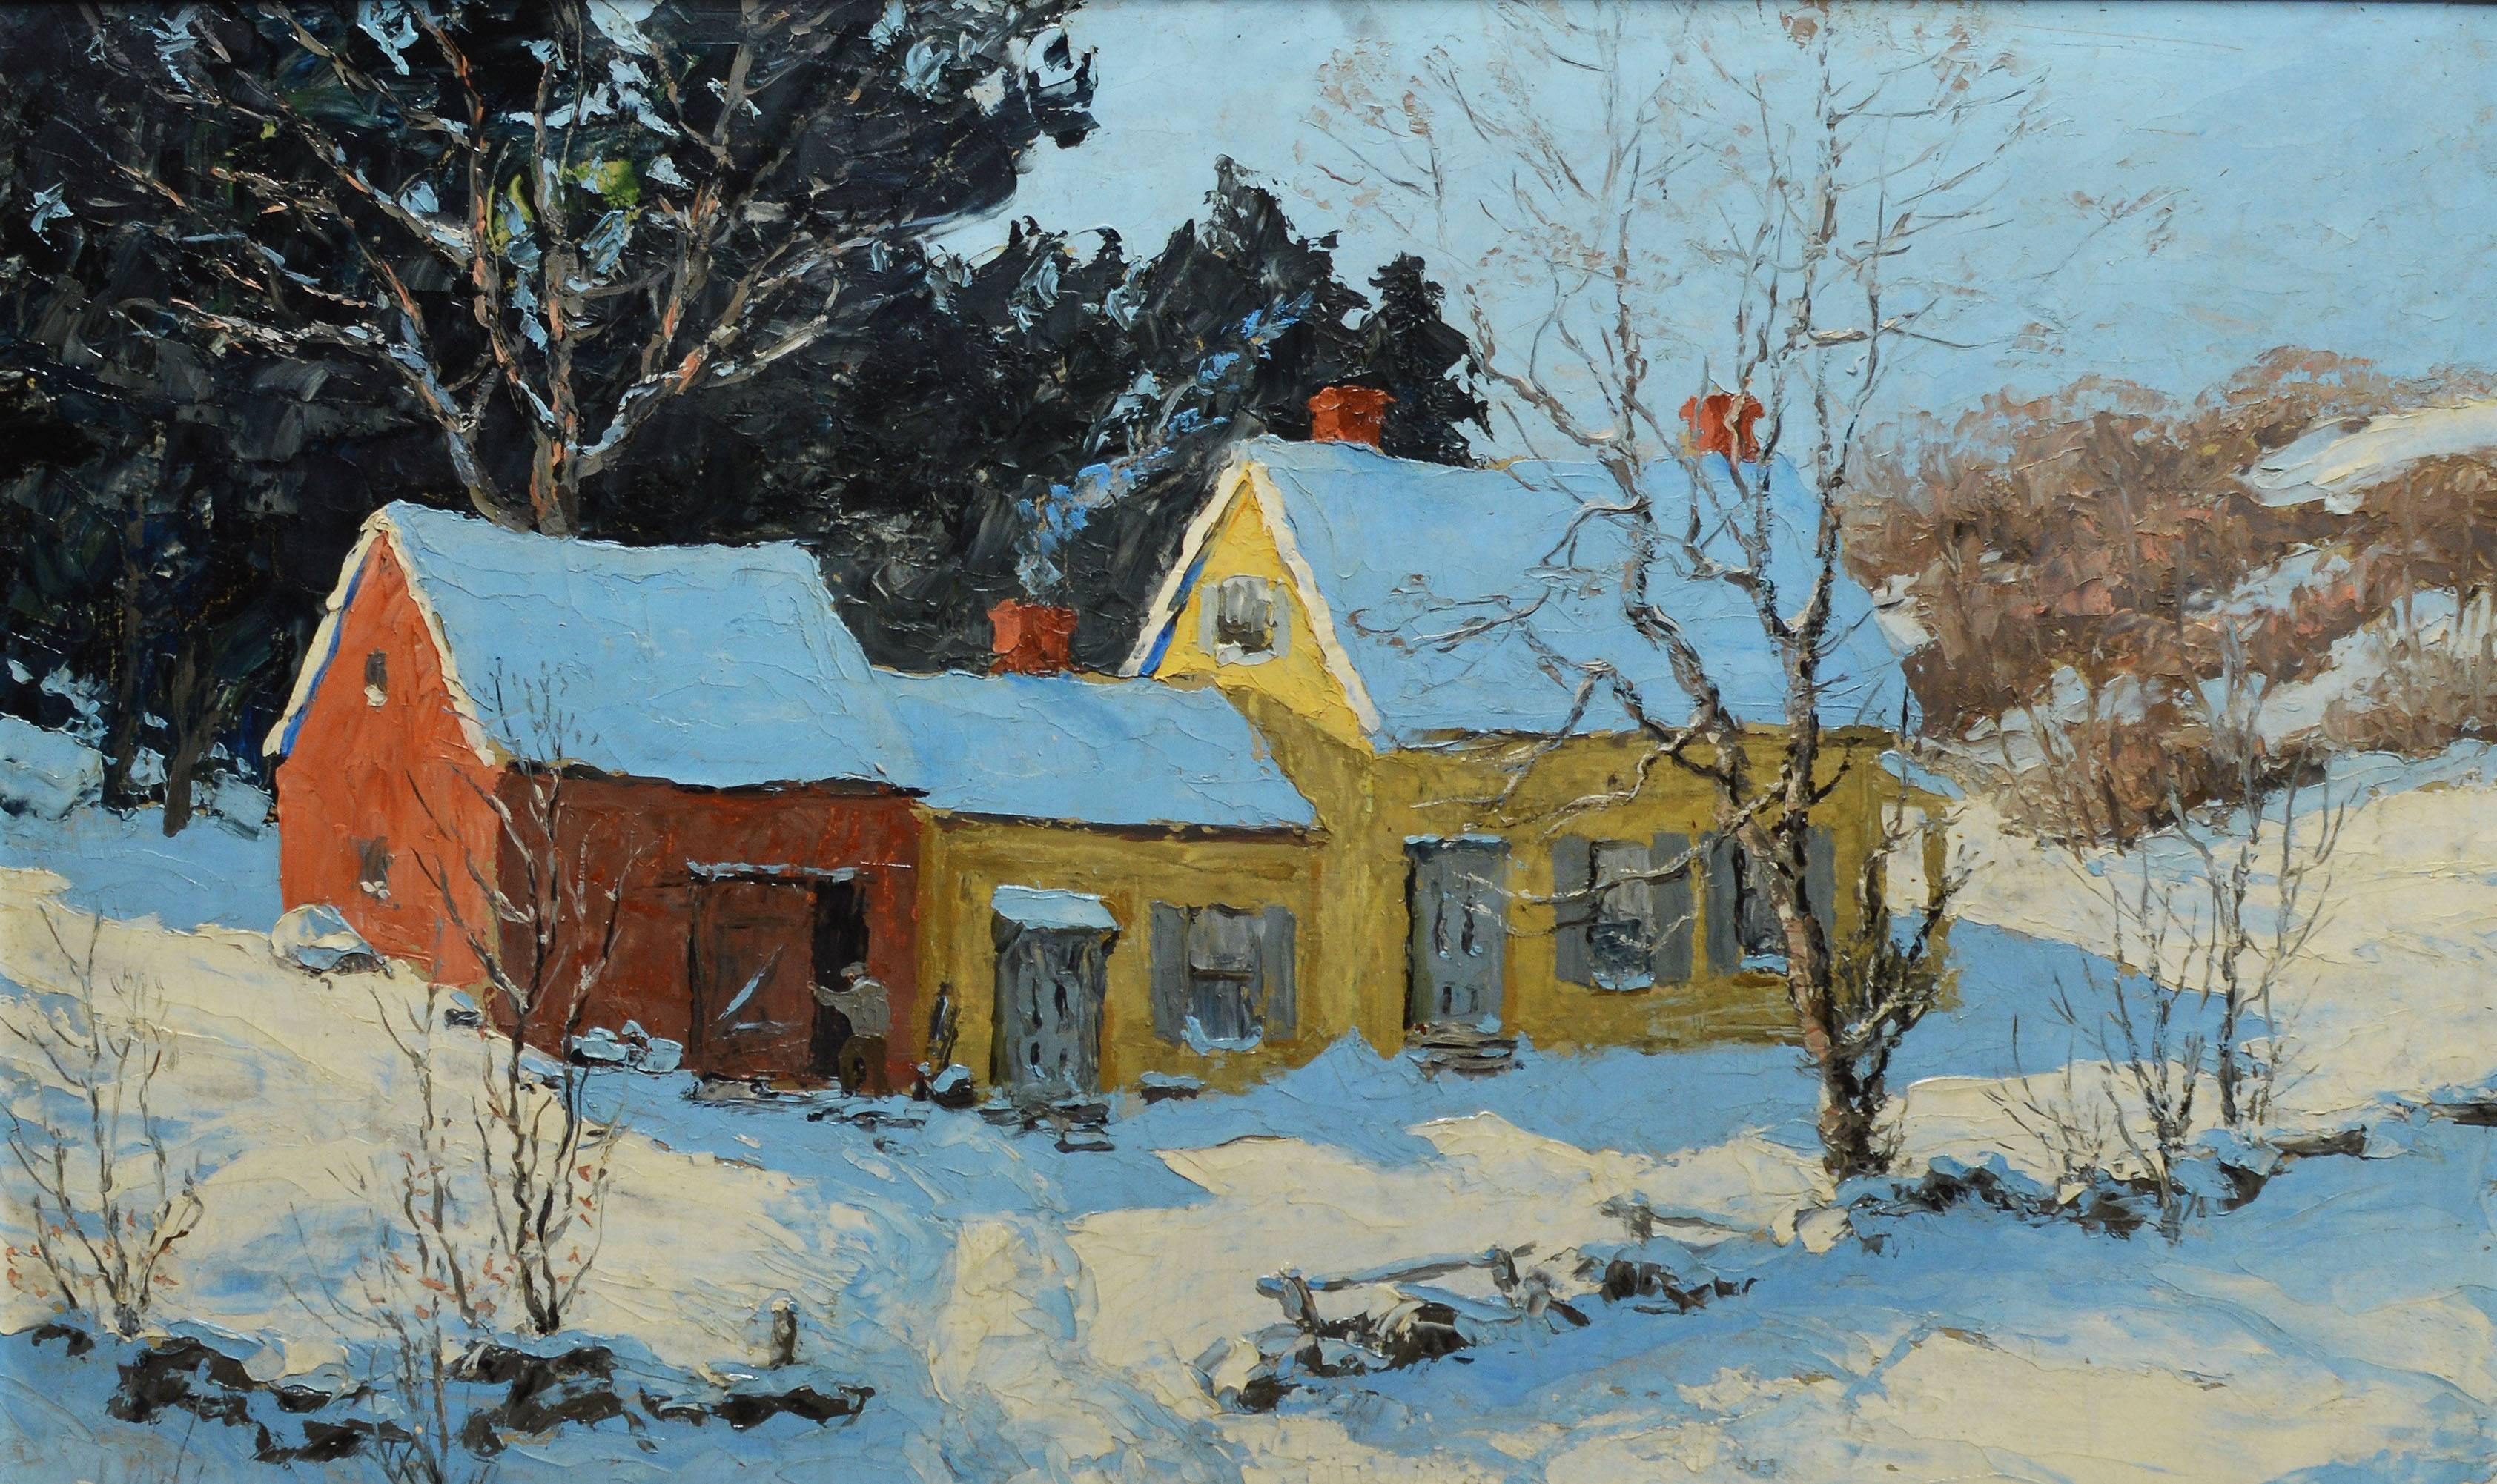 Winter Landscape with Barns by Marion Gray Traver - Impressionist Painting by Marion Gray Traver 